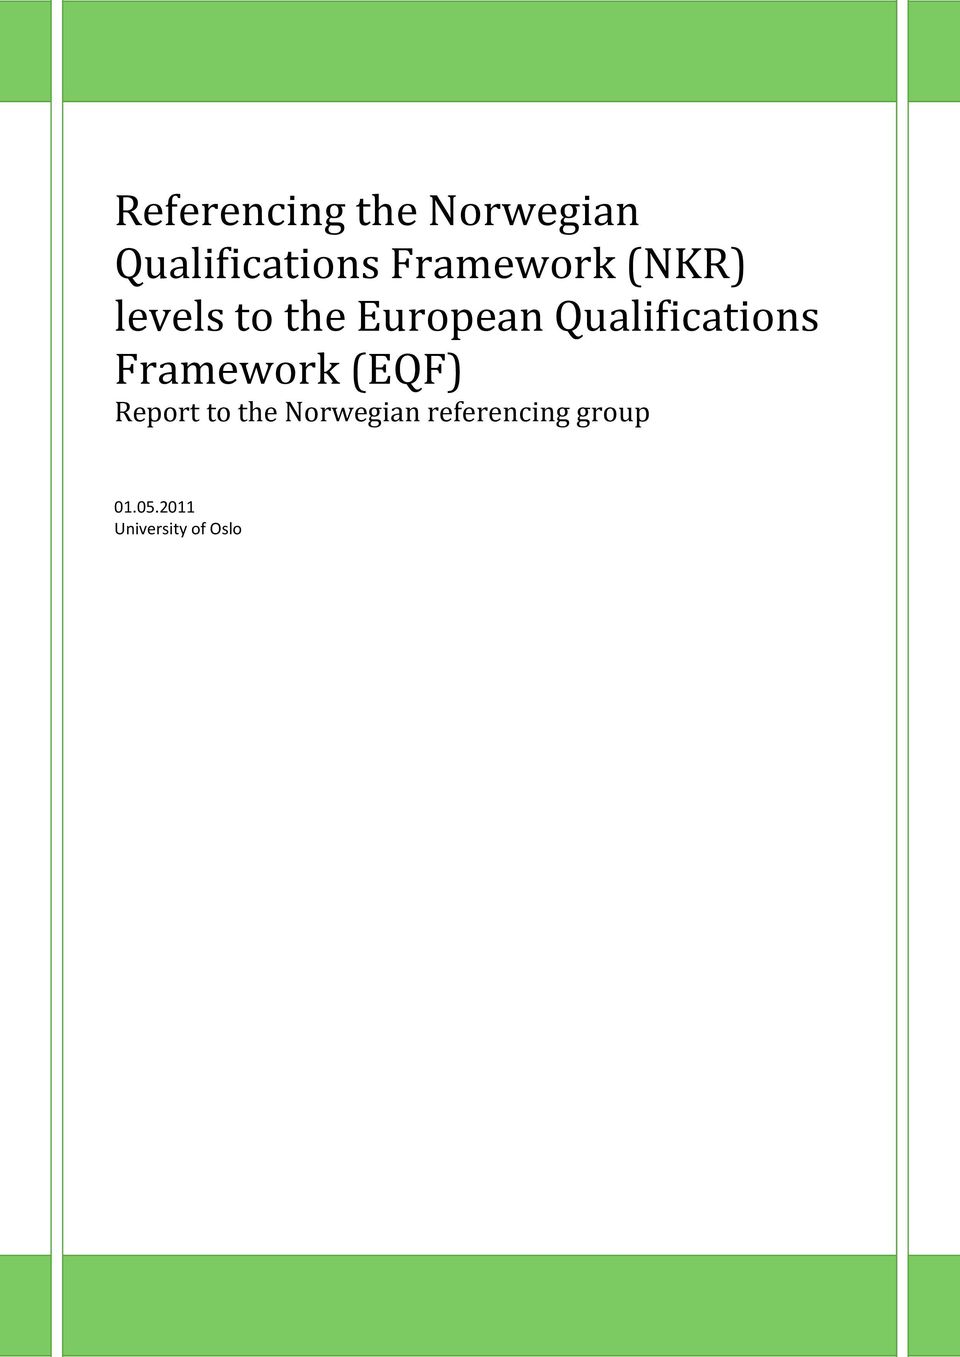 Qualifications Framework (EQF) Report to the